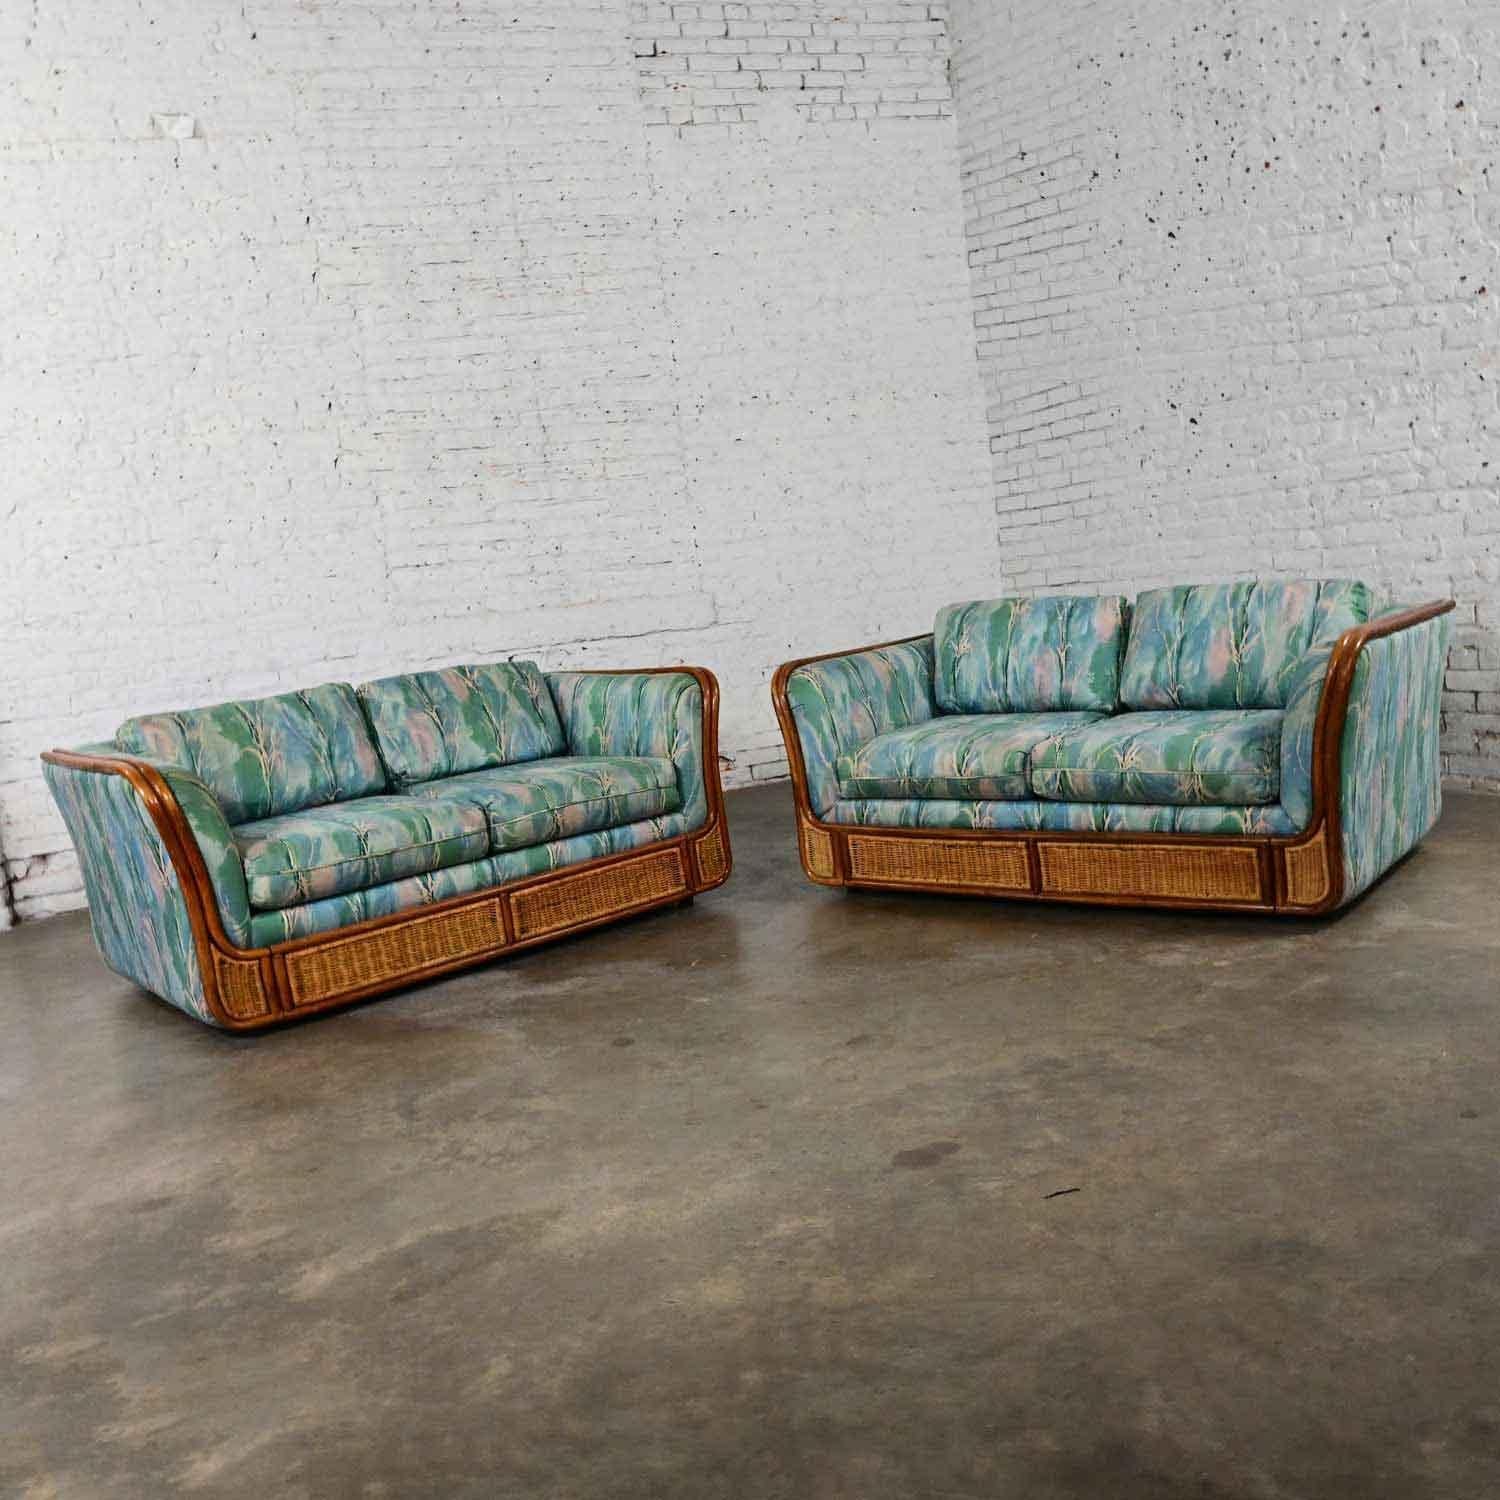 Late 20th Century Boho Chic Rattan & Wicker Tuxedo Style Upholstered Loveseats For Sale 3